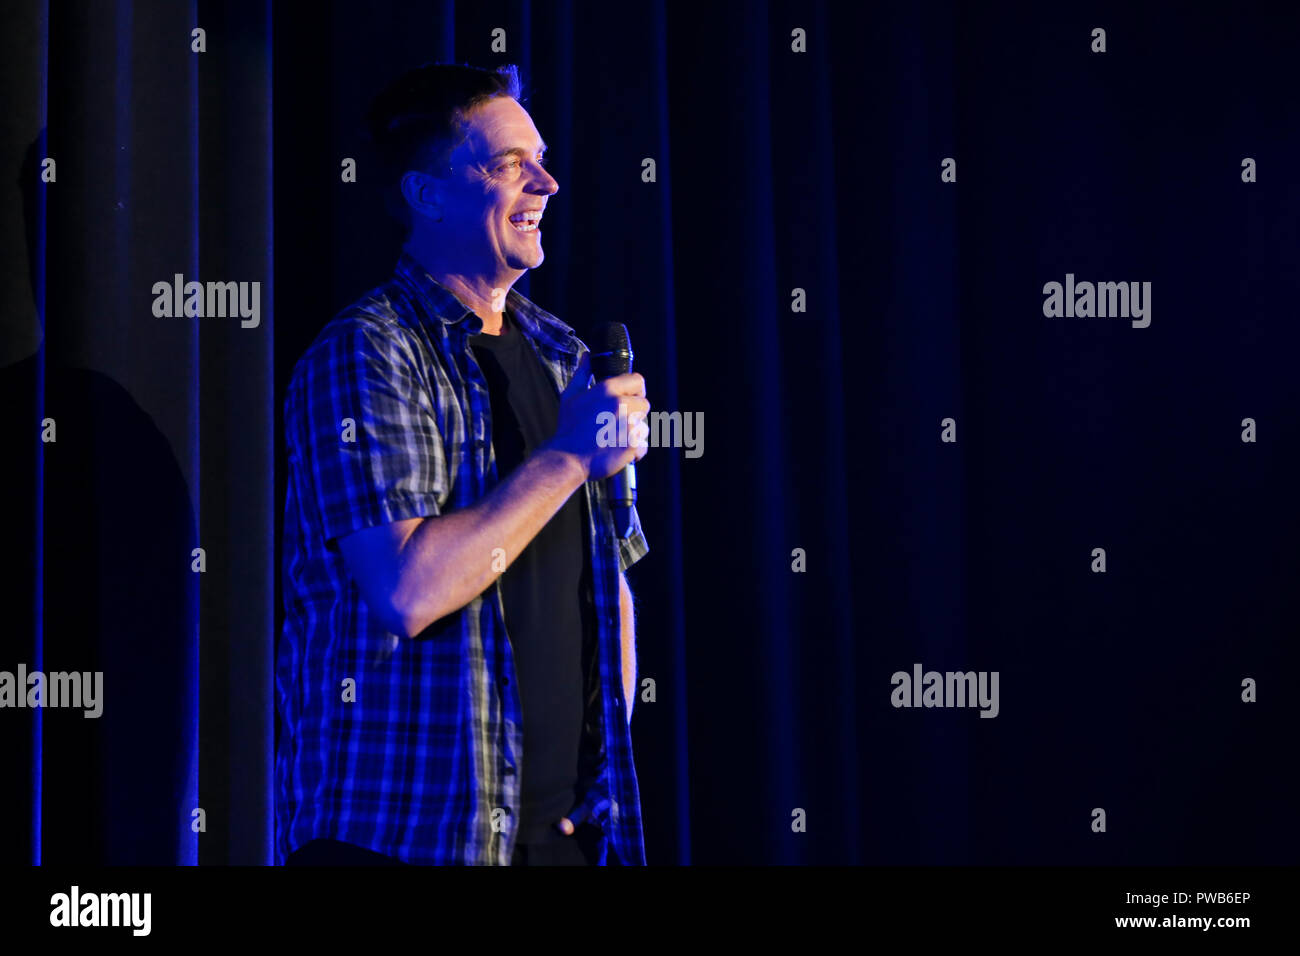 Huntington, New York, USA. 13 October 2018. Comedian Jim Breuer performs at the Paramount on October 13, 2018 in Huntington, New York. Credit: Debby Wong/Alamy Live News Stock Photo